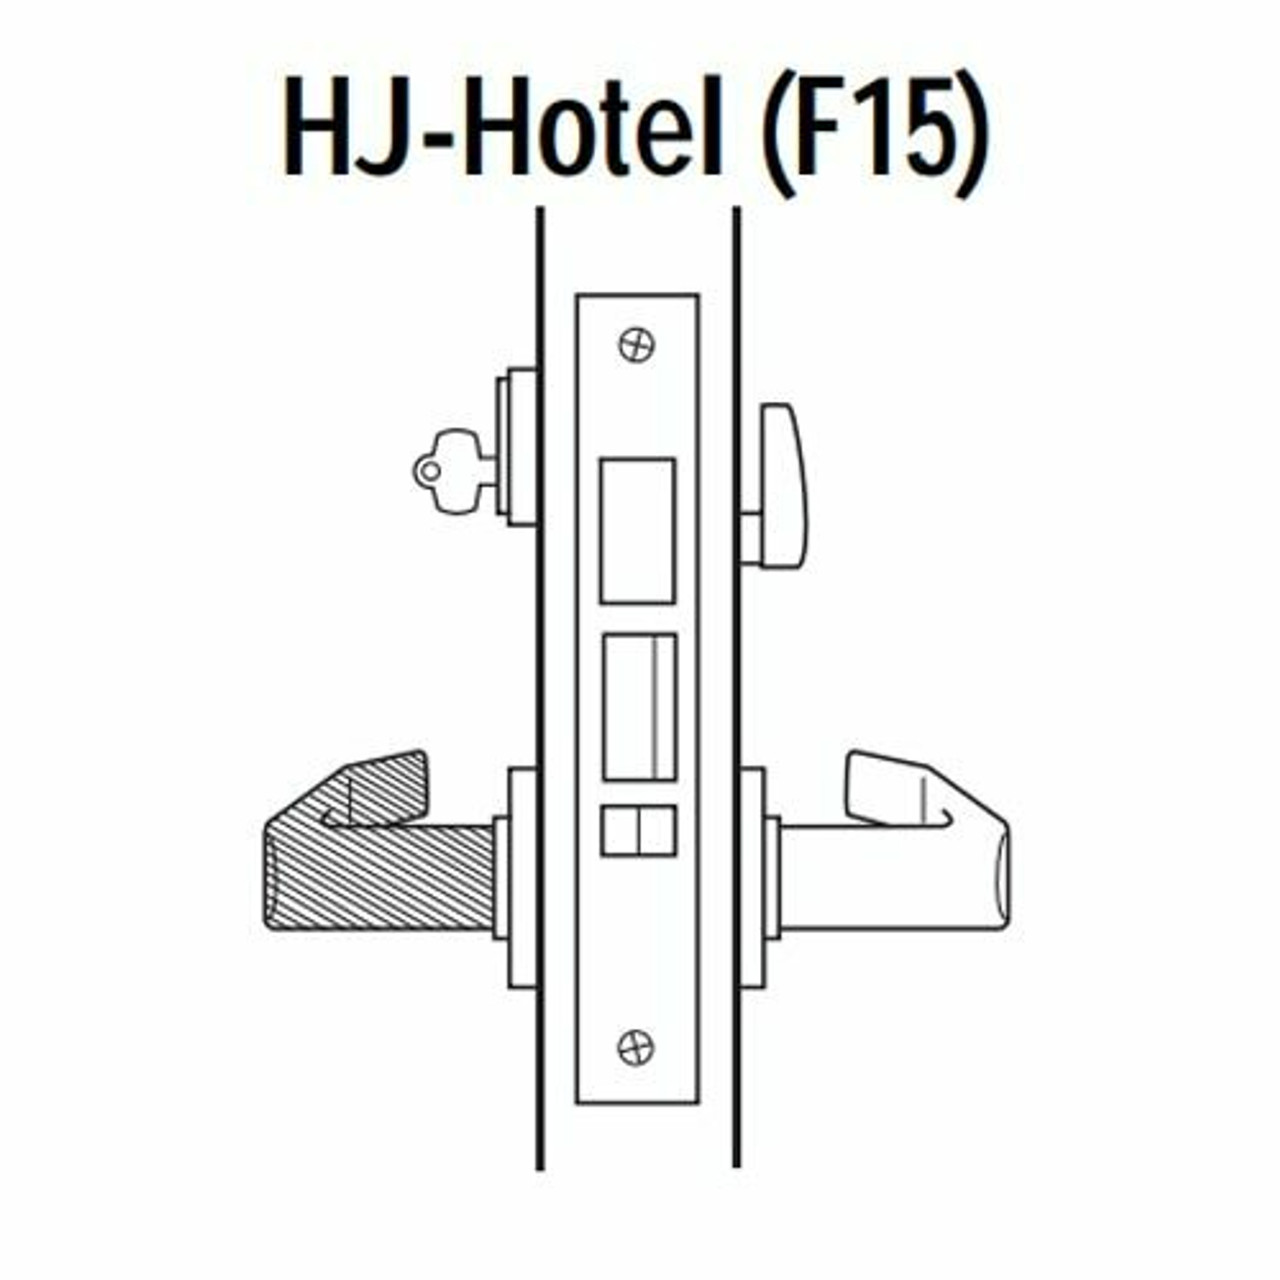 45H7HJ17RN618 Best 40H Series Hotel with Deadbolt Heavy Duty Mortise Lever Lock with Gull Wing RH in Bright Nickel